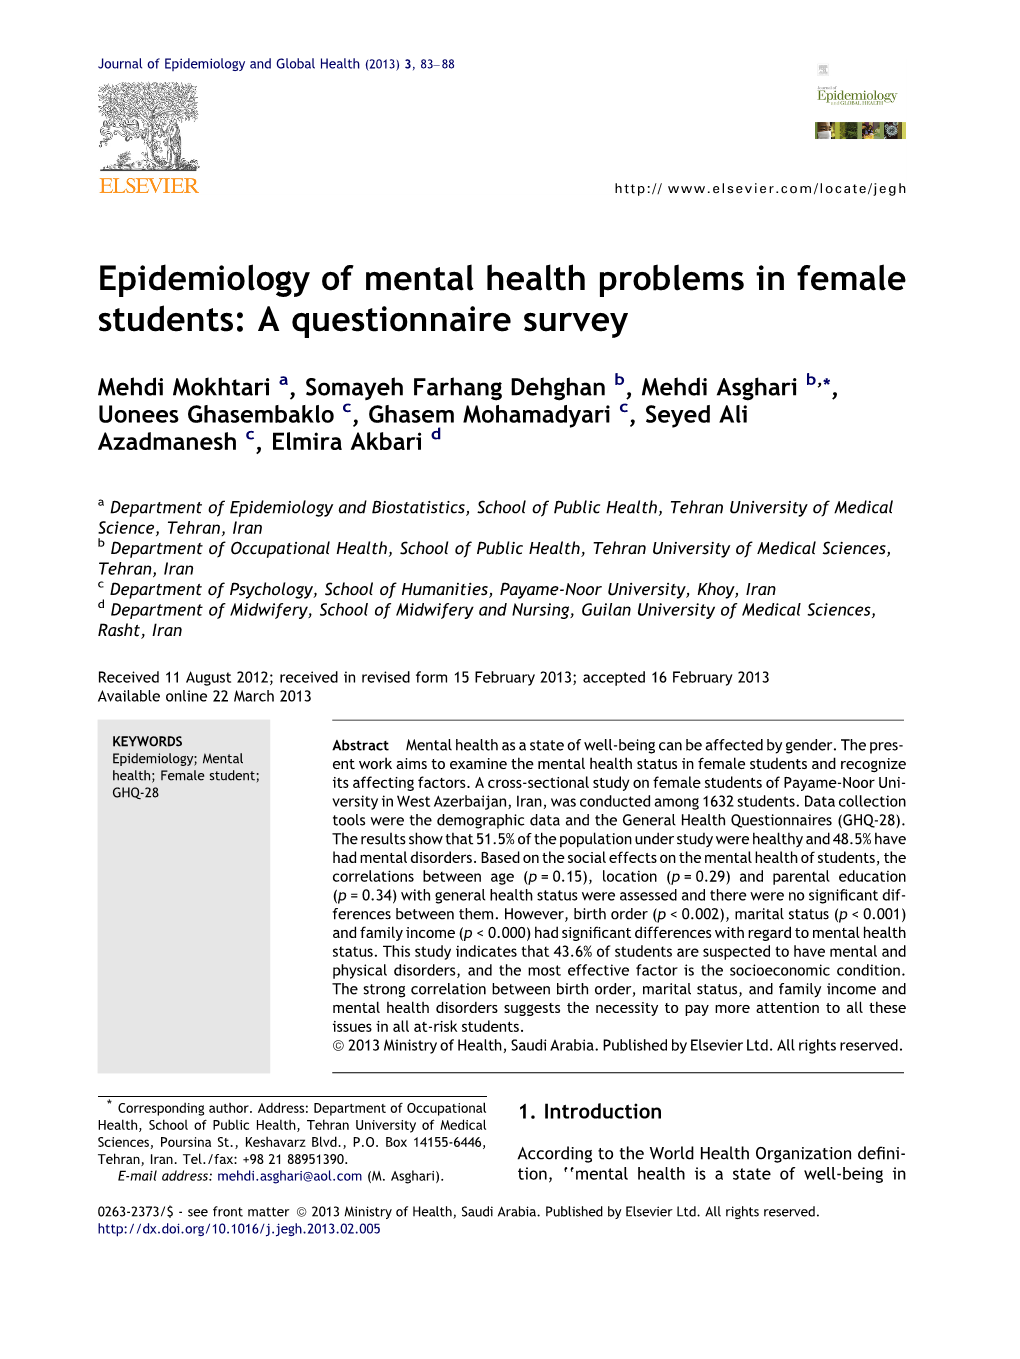 Epidemiology of Mental Health Problems in Female Students: a Questionnaire Survey